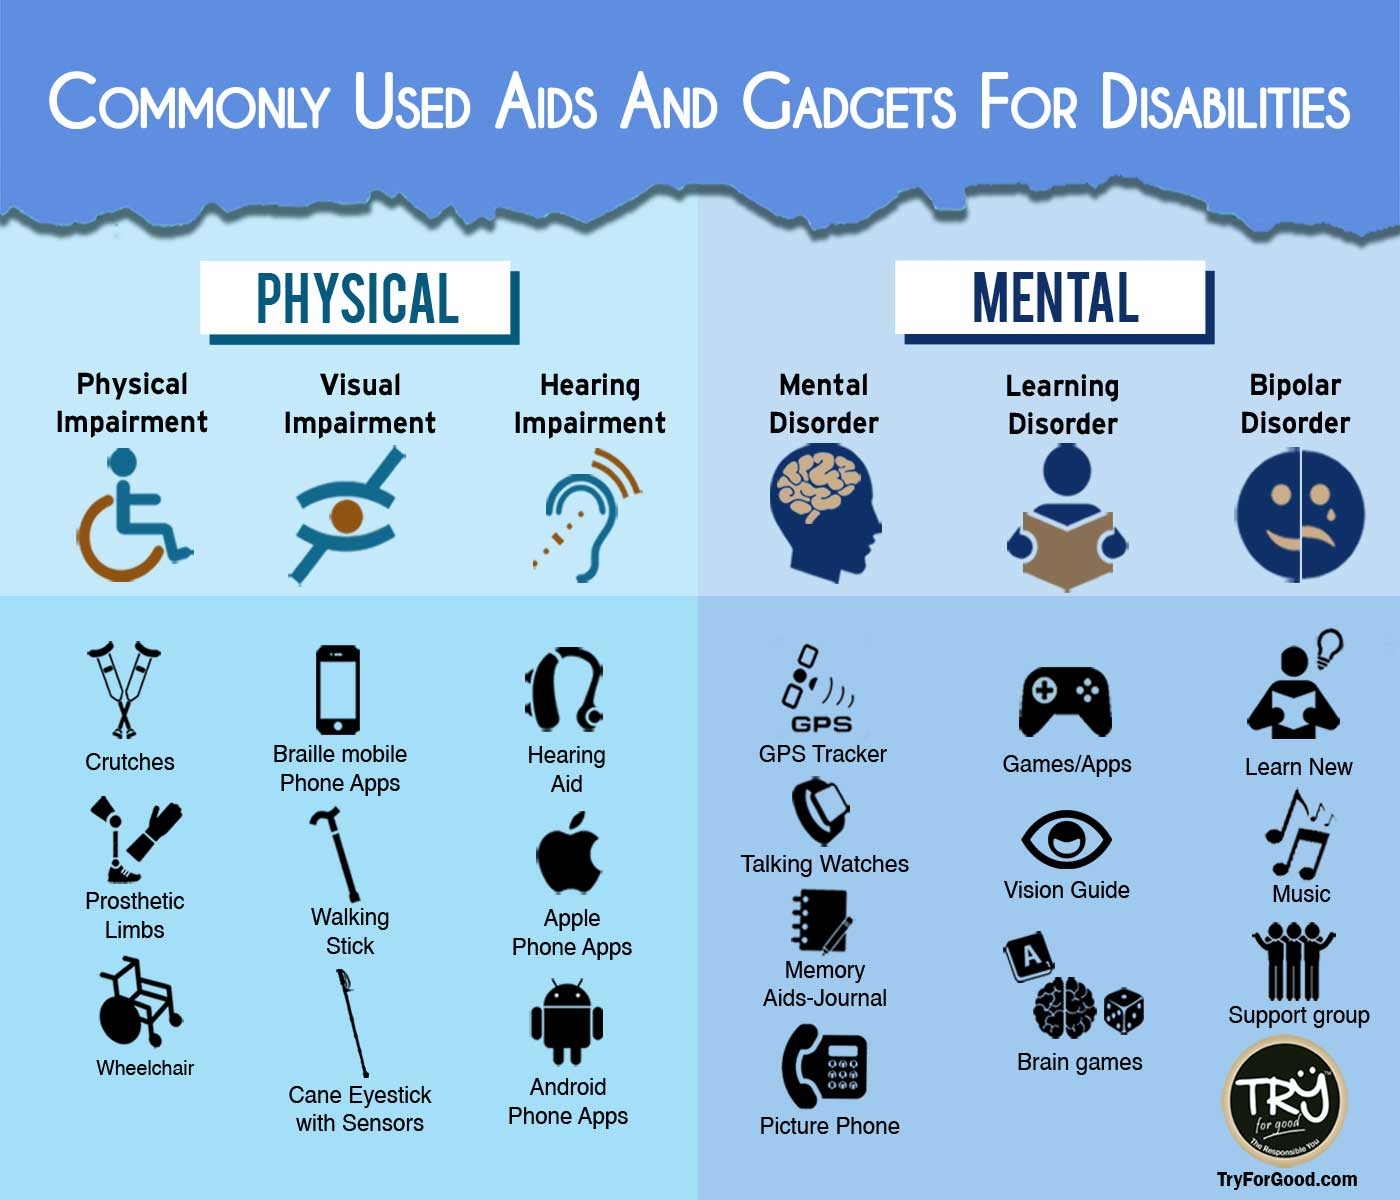 Commonly Used Aids And Gadgets For The Disabilities - TRY For Good